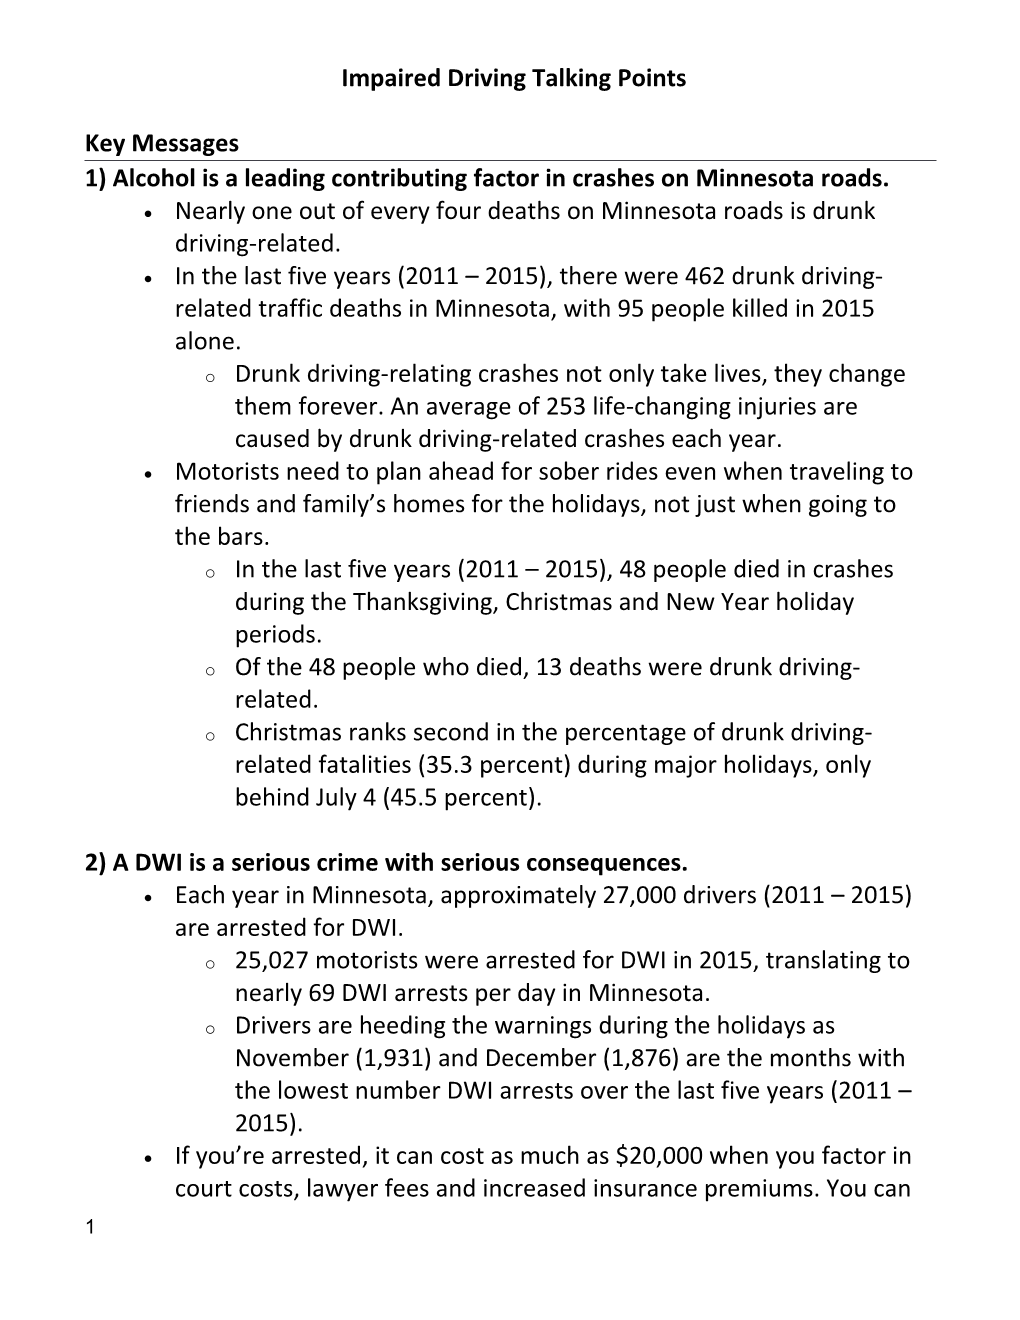 1) Alcohol Is a Leading Contributing Factor in Crashes on Minnesota Roads